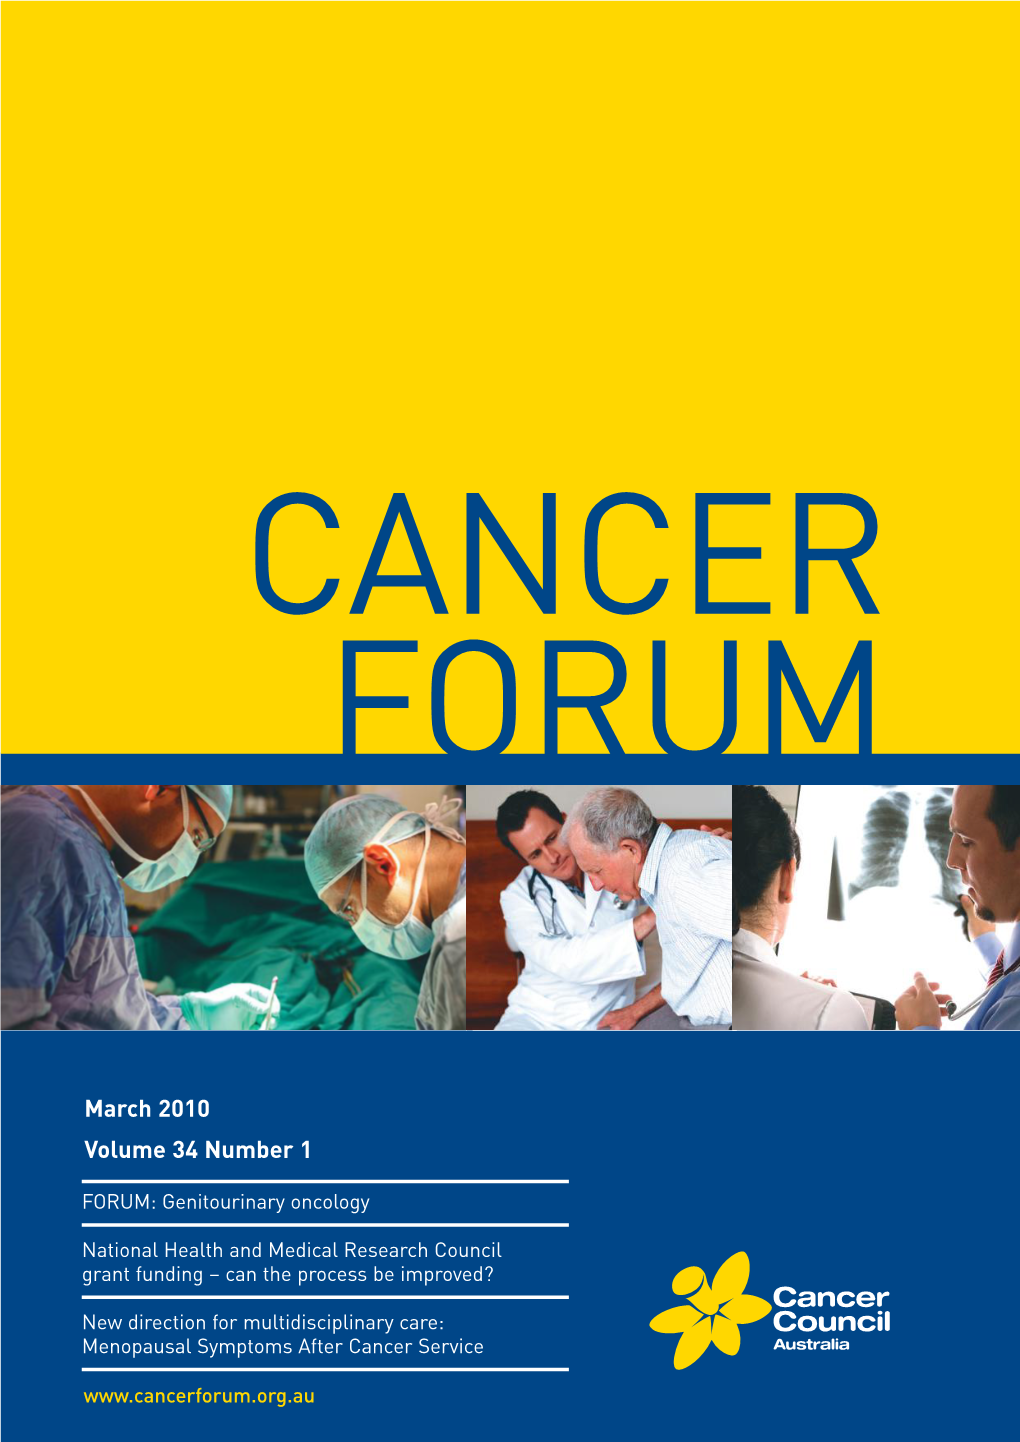 Cancer Forum Cancer Forum Is Produced by Cancer Council Australia for Health Professionals Working in Cancer Control